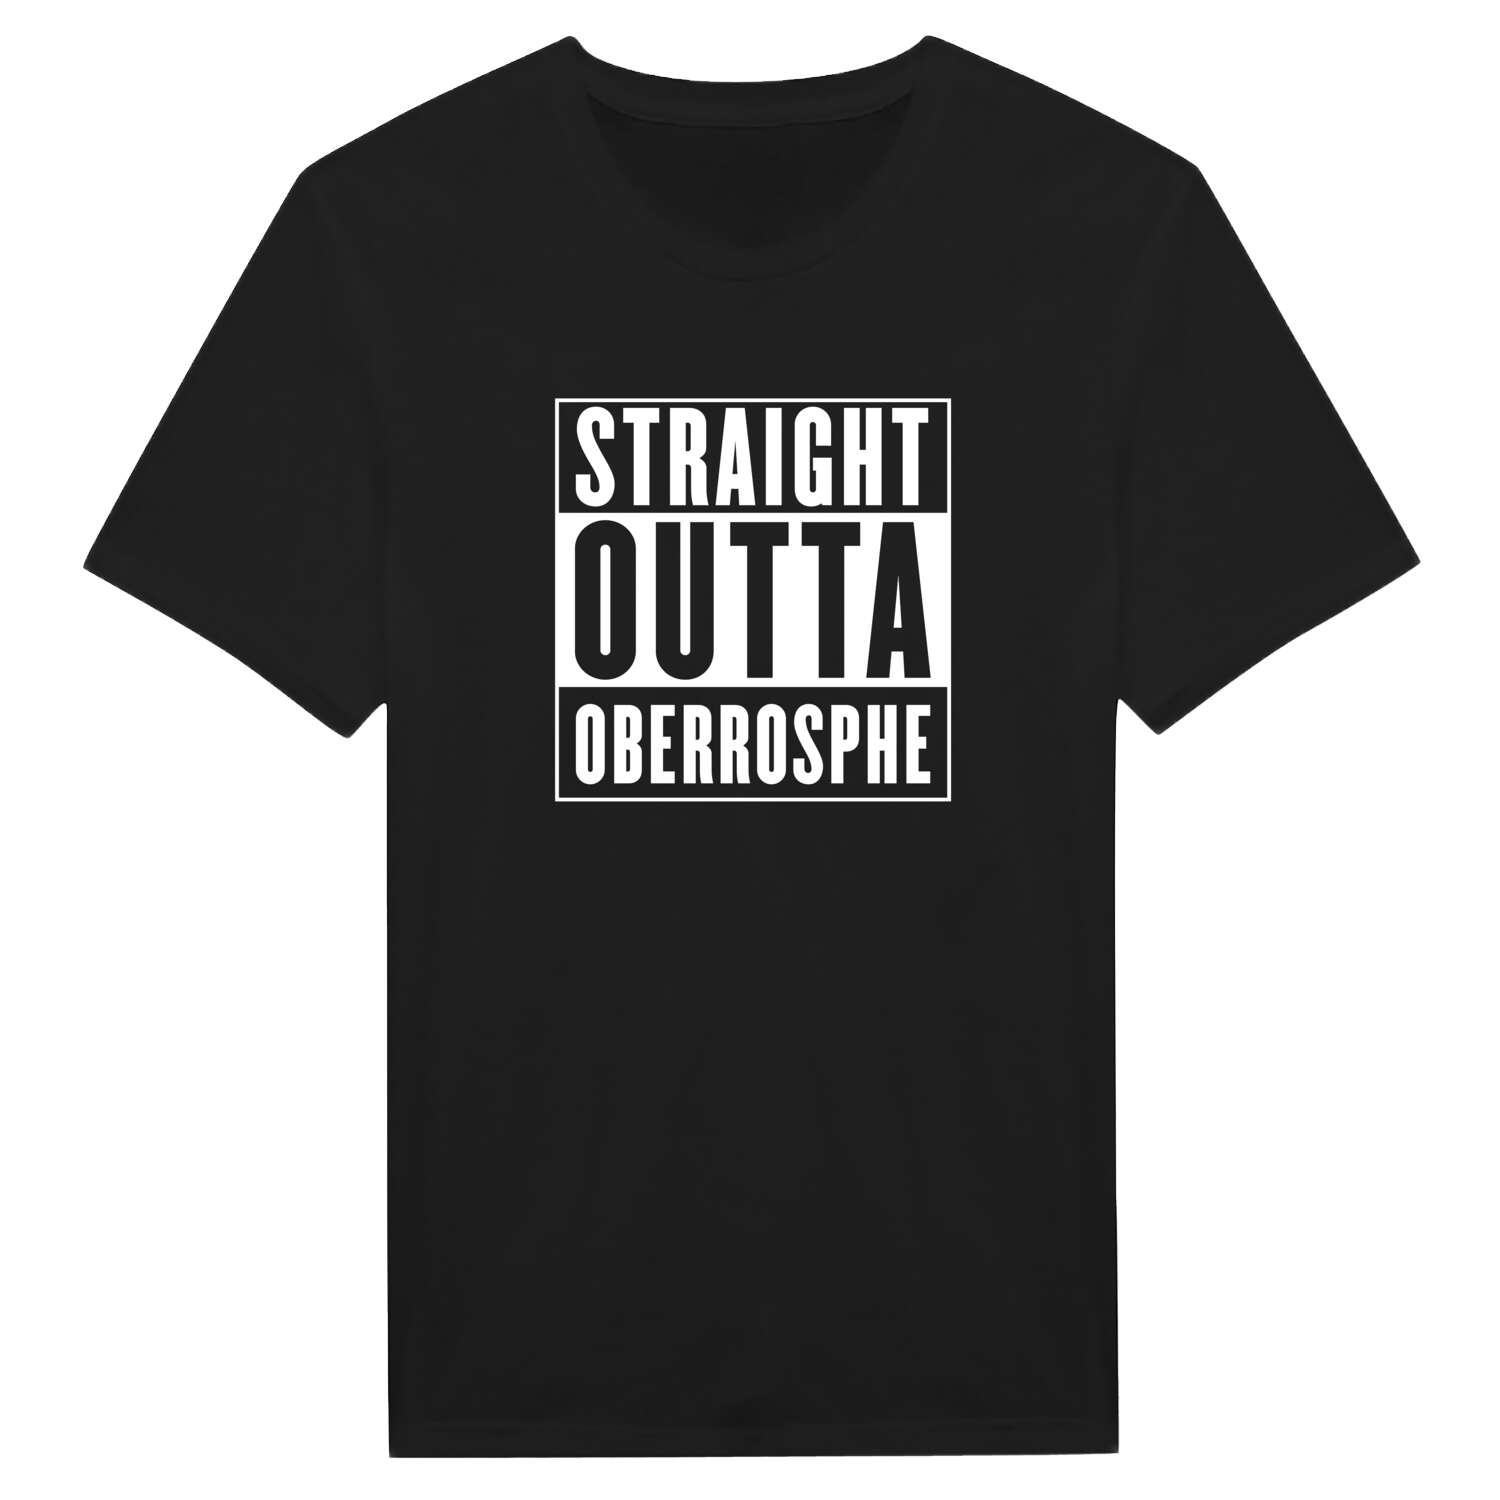 Oberrosphe T-Shirt »Straight Outta«